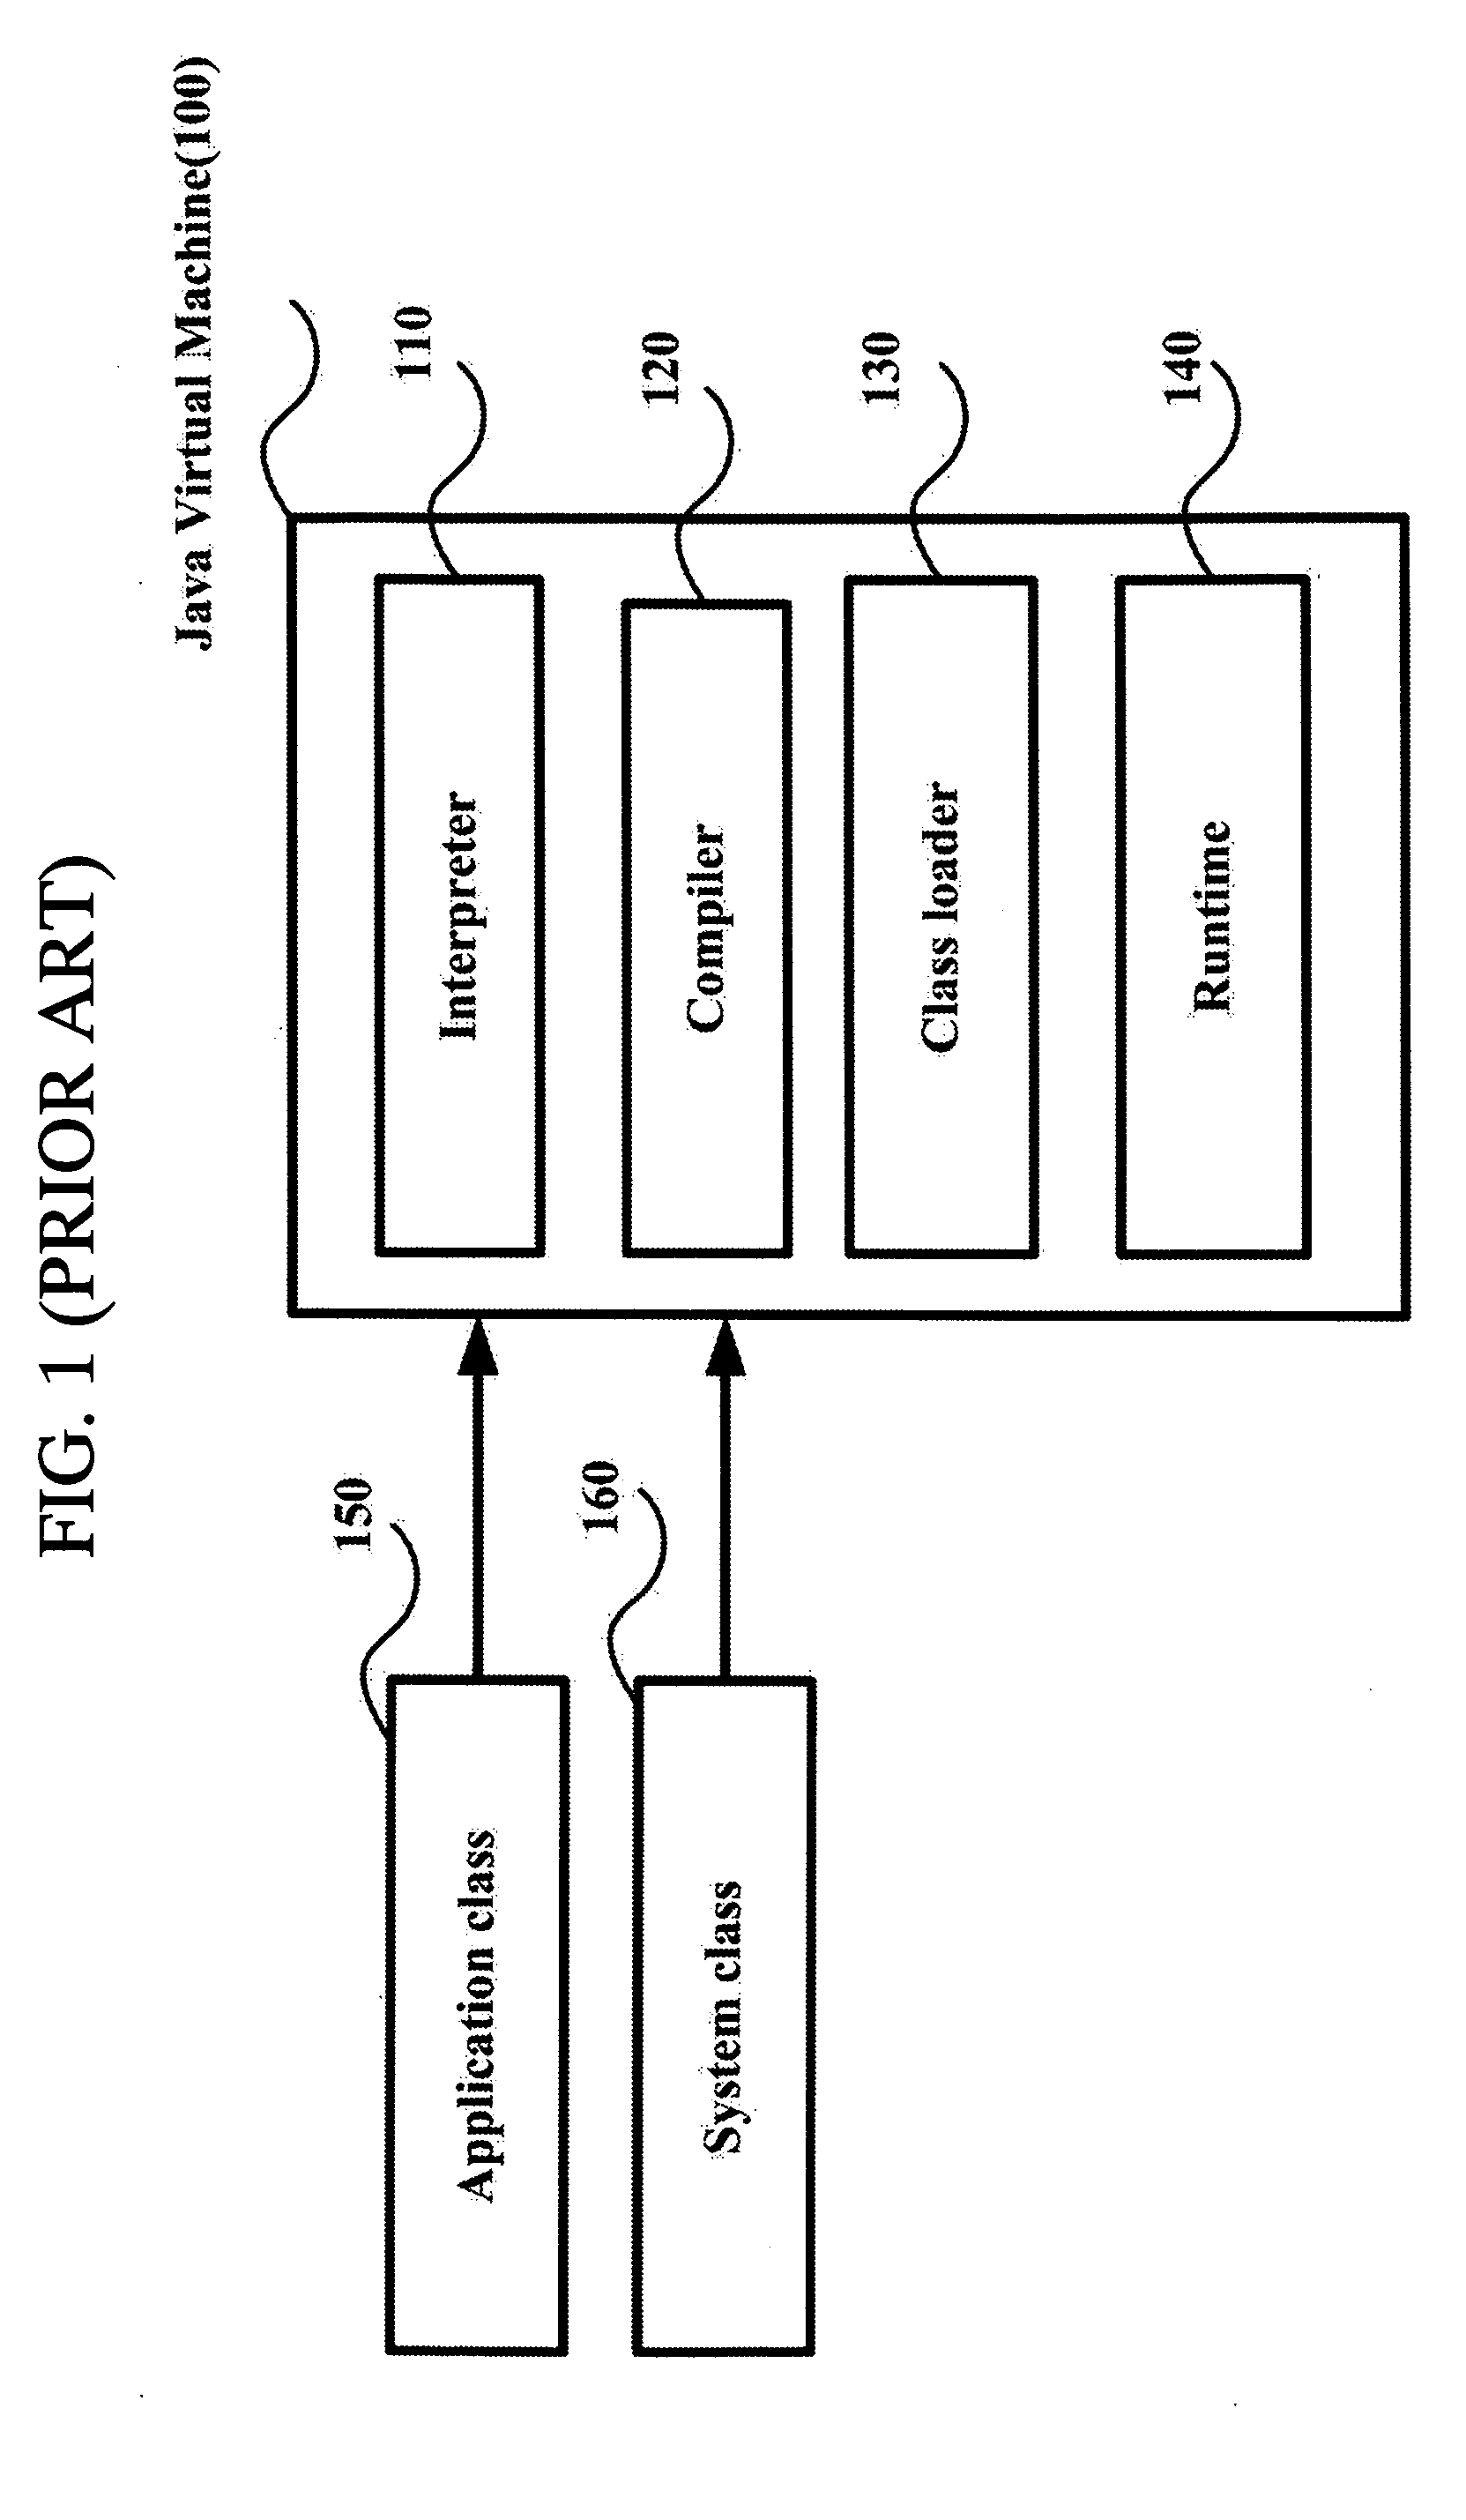 Method and system for improving performance of Java virtual machine